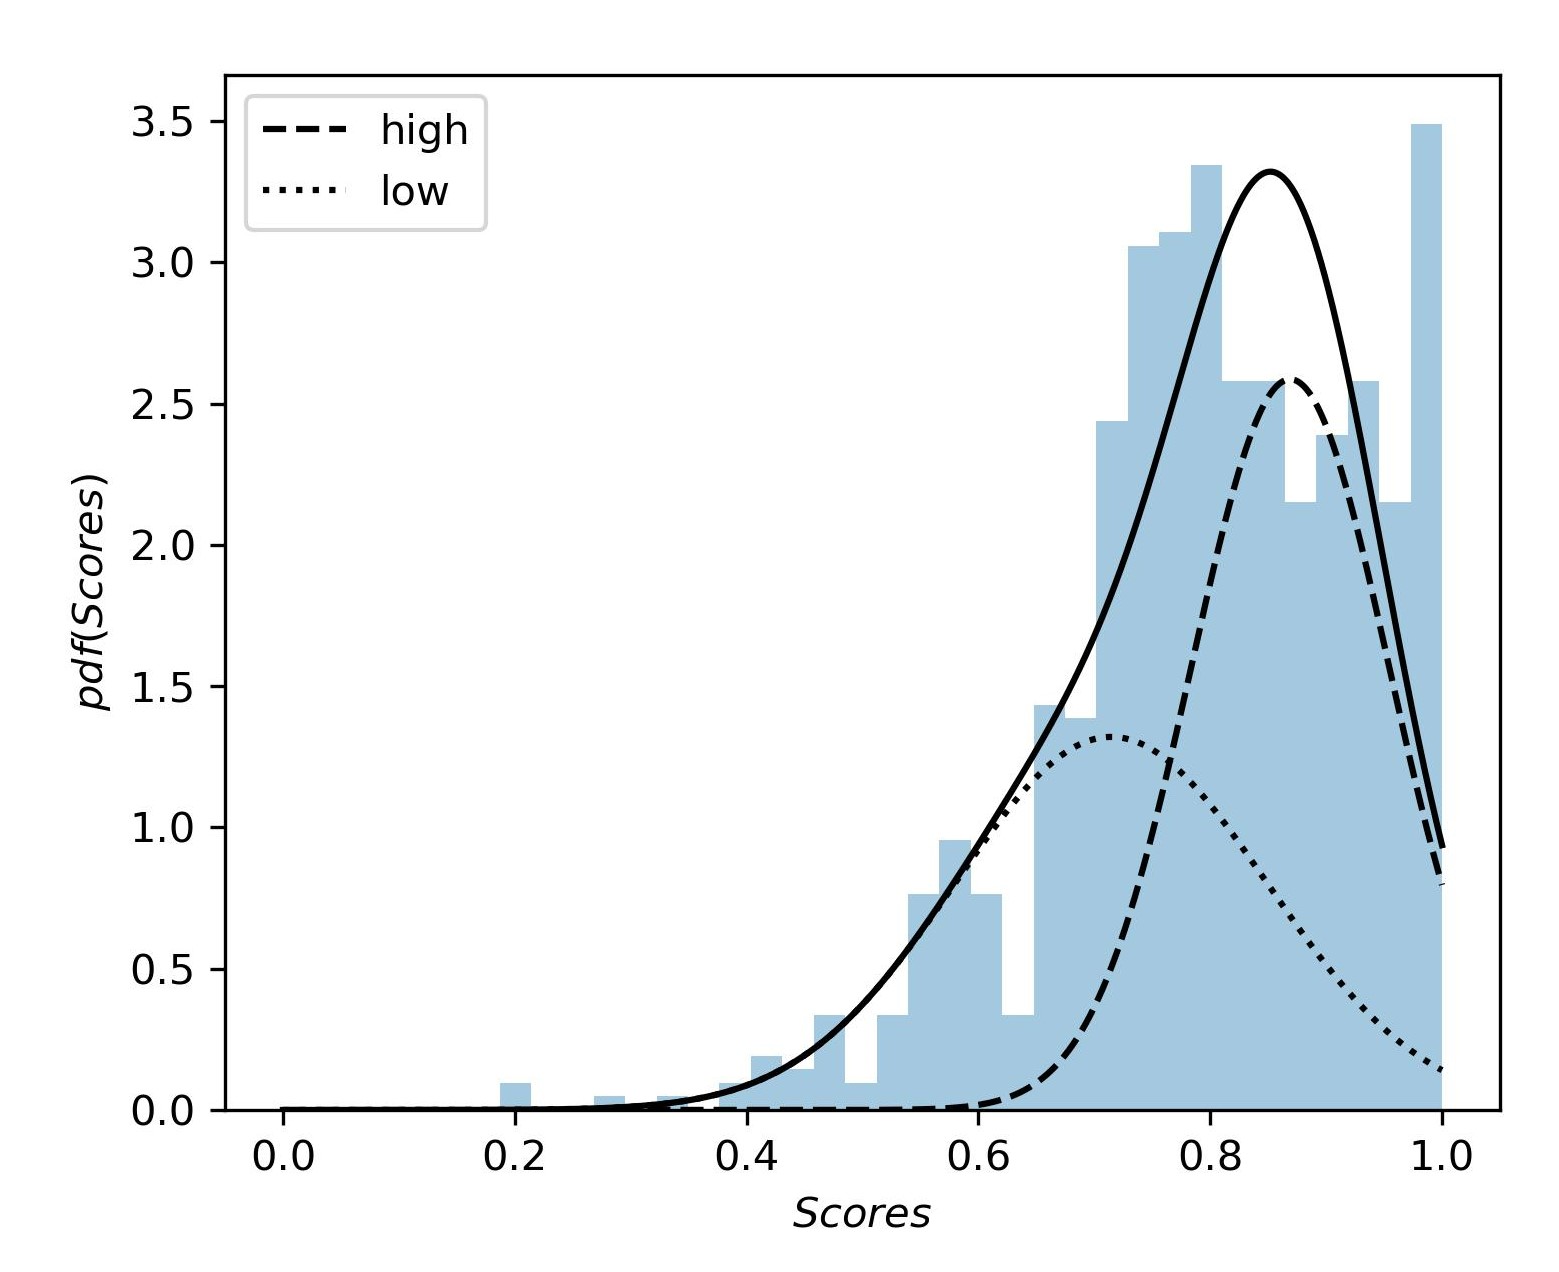 The division of the feature Scores distribution into two components or distribution using Gaussian Mixture Modeling.